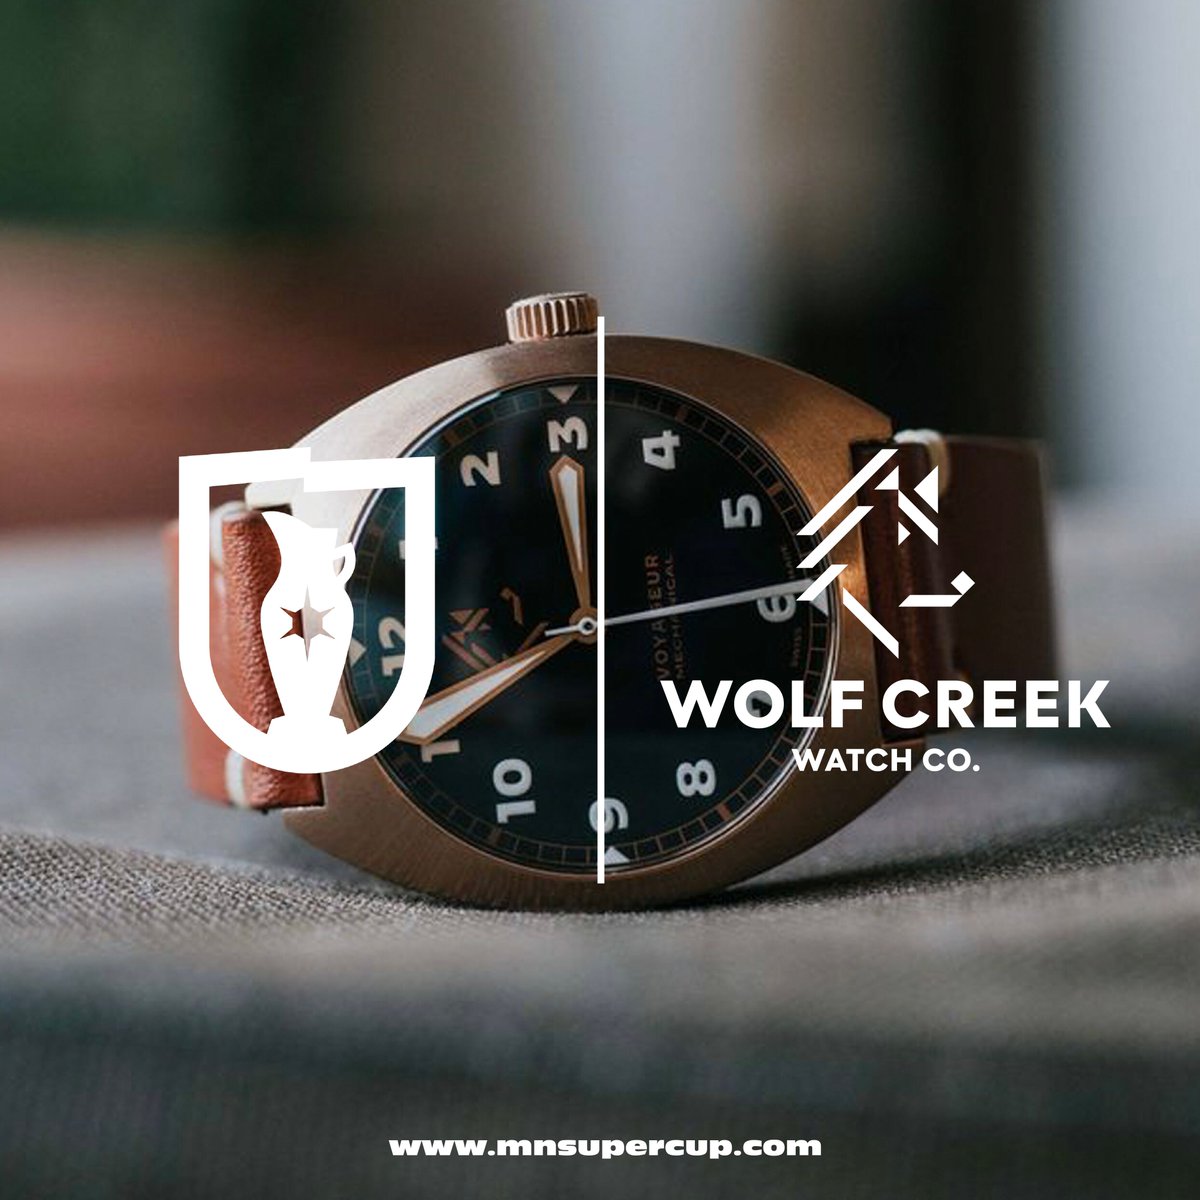 Simple, elegant, practical, and every referee’s dream timepiece. We’re proud to team up with Wolf Creek Watch Co. for this year’s #MinnesotaSuperCup, where durability and precision get you to the podium. It’s always winning time when you’re wearing Wolf Creek!